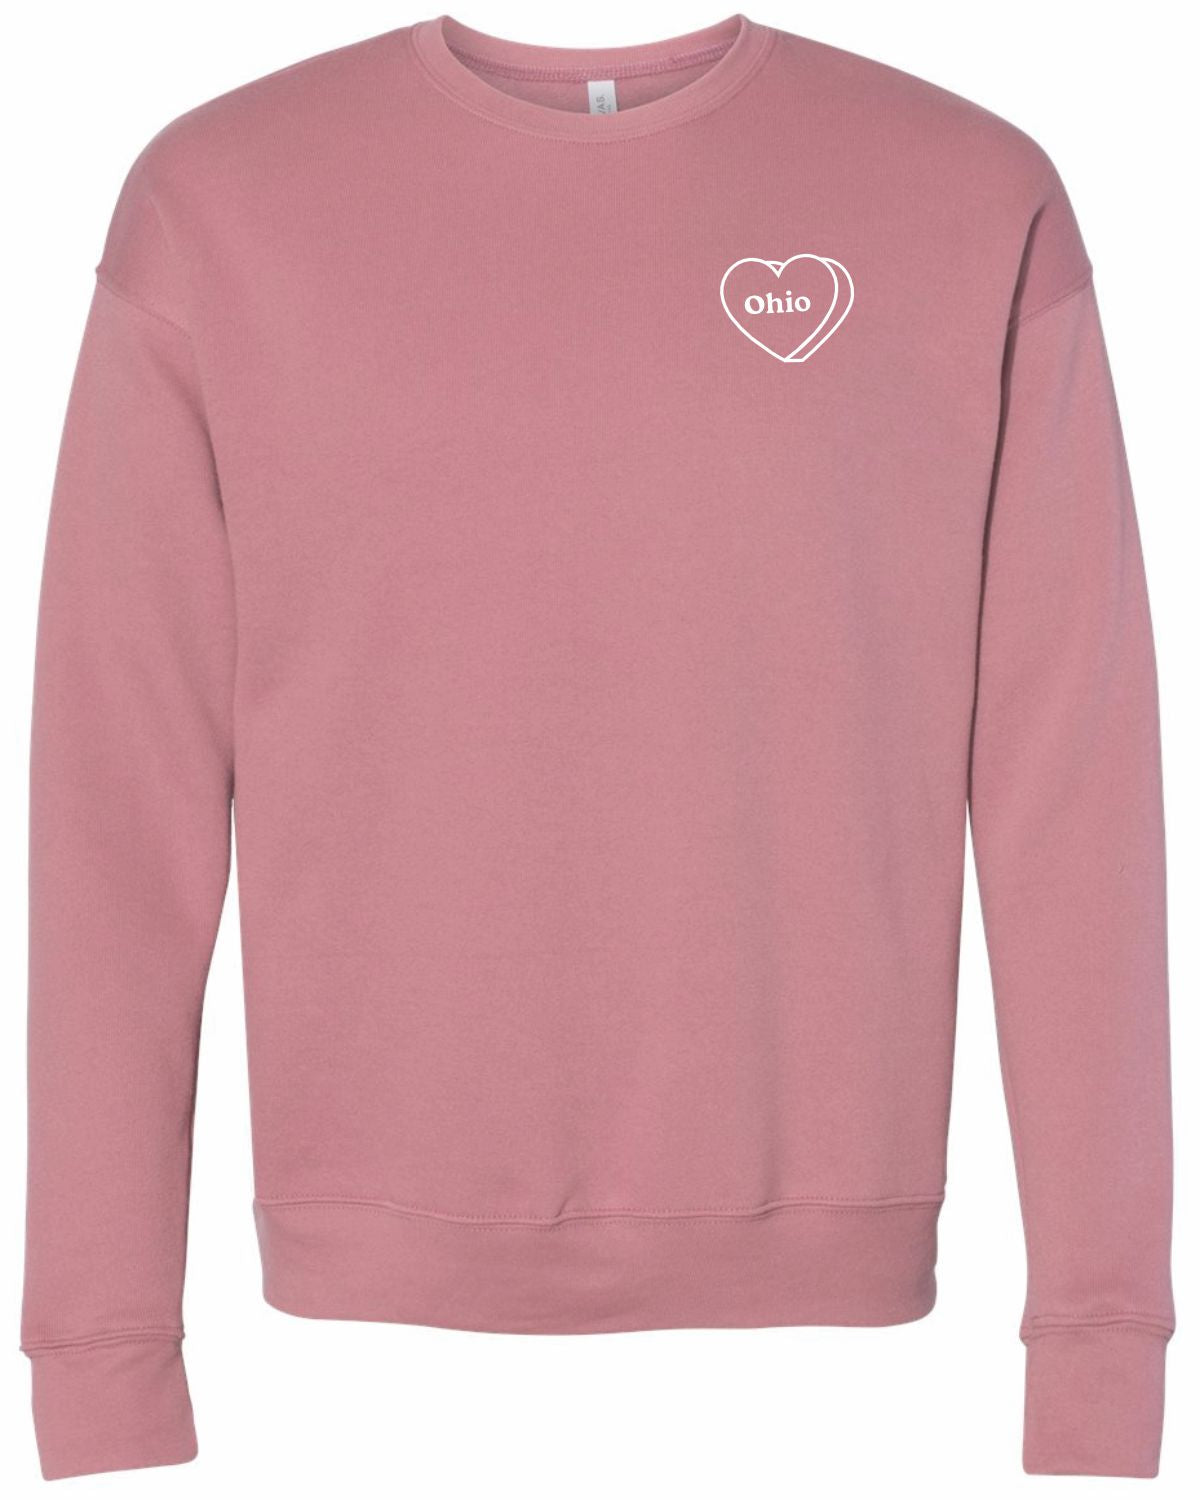 Ohio Candy Hearts Embroidered Crew